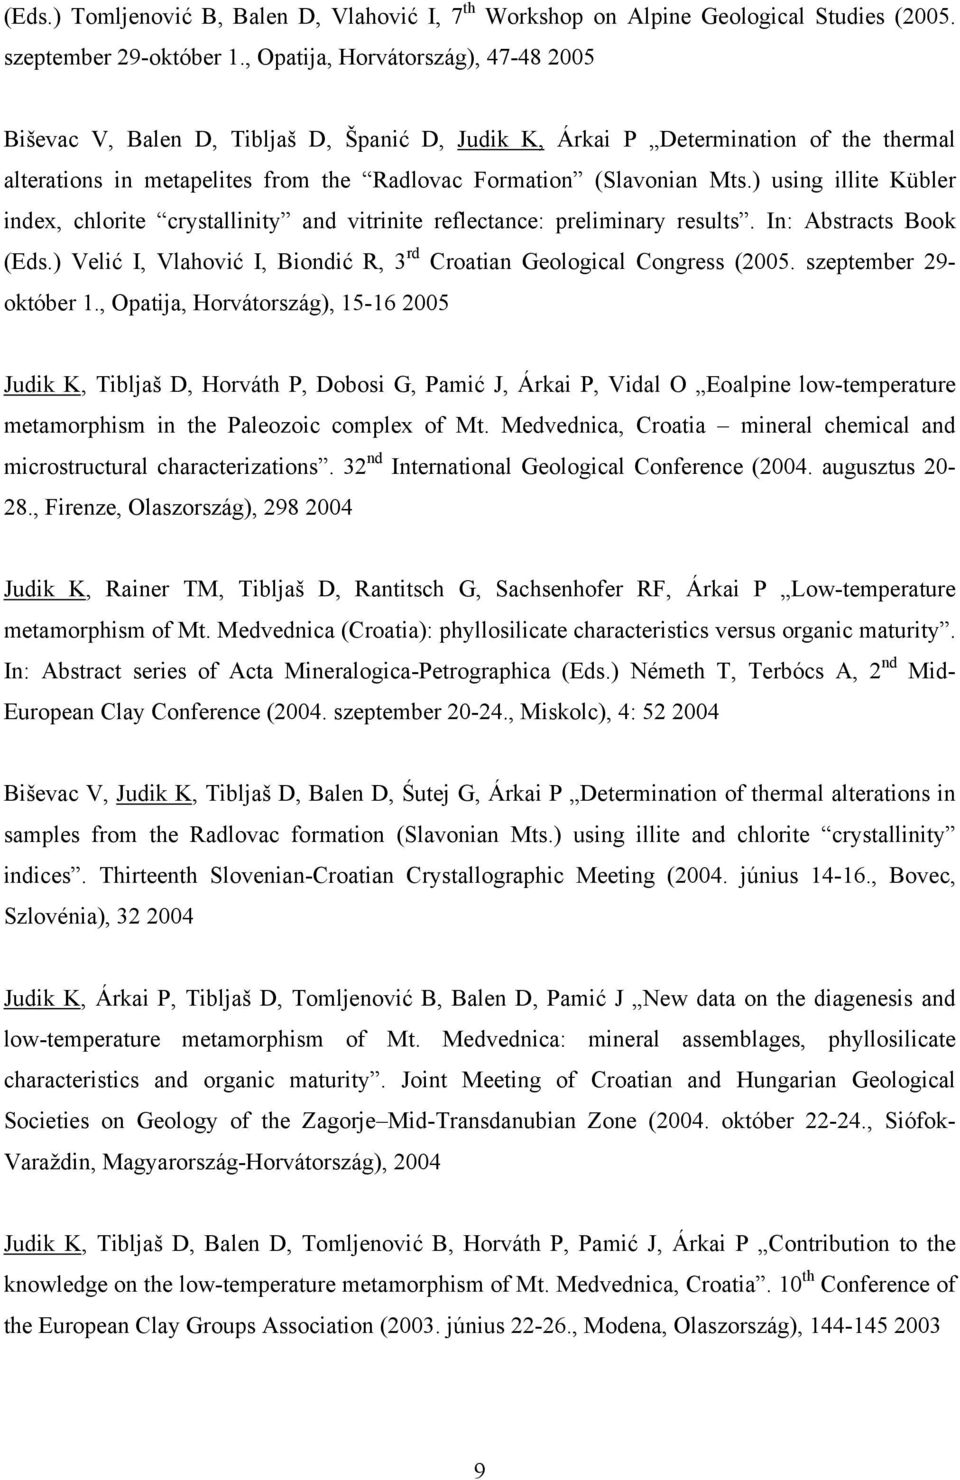 ) using illite Kübler index, chlorite crystallinity and vitrinite reflectance: preliminary results. In: Abstracts Book (Eds.) Velić I, Vlahović I, Biondić R, 3 rd Croatian Geological Congress (2005.